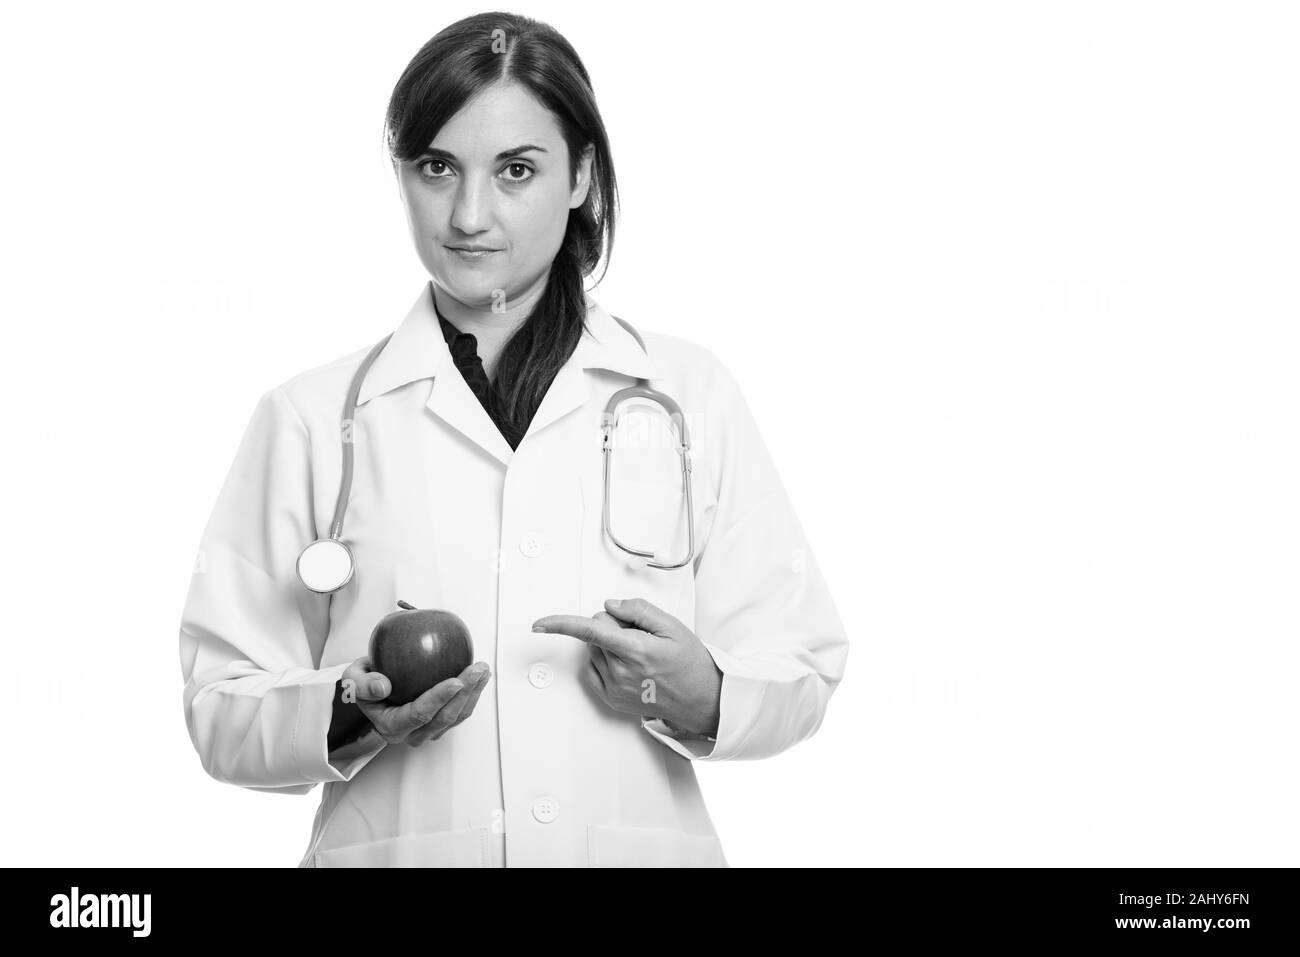 Portrait of beautiful woman doctor as nutritionist with apple Stock Photo